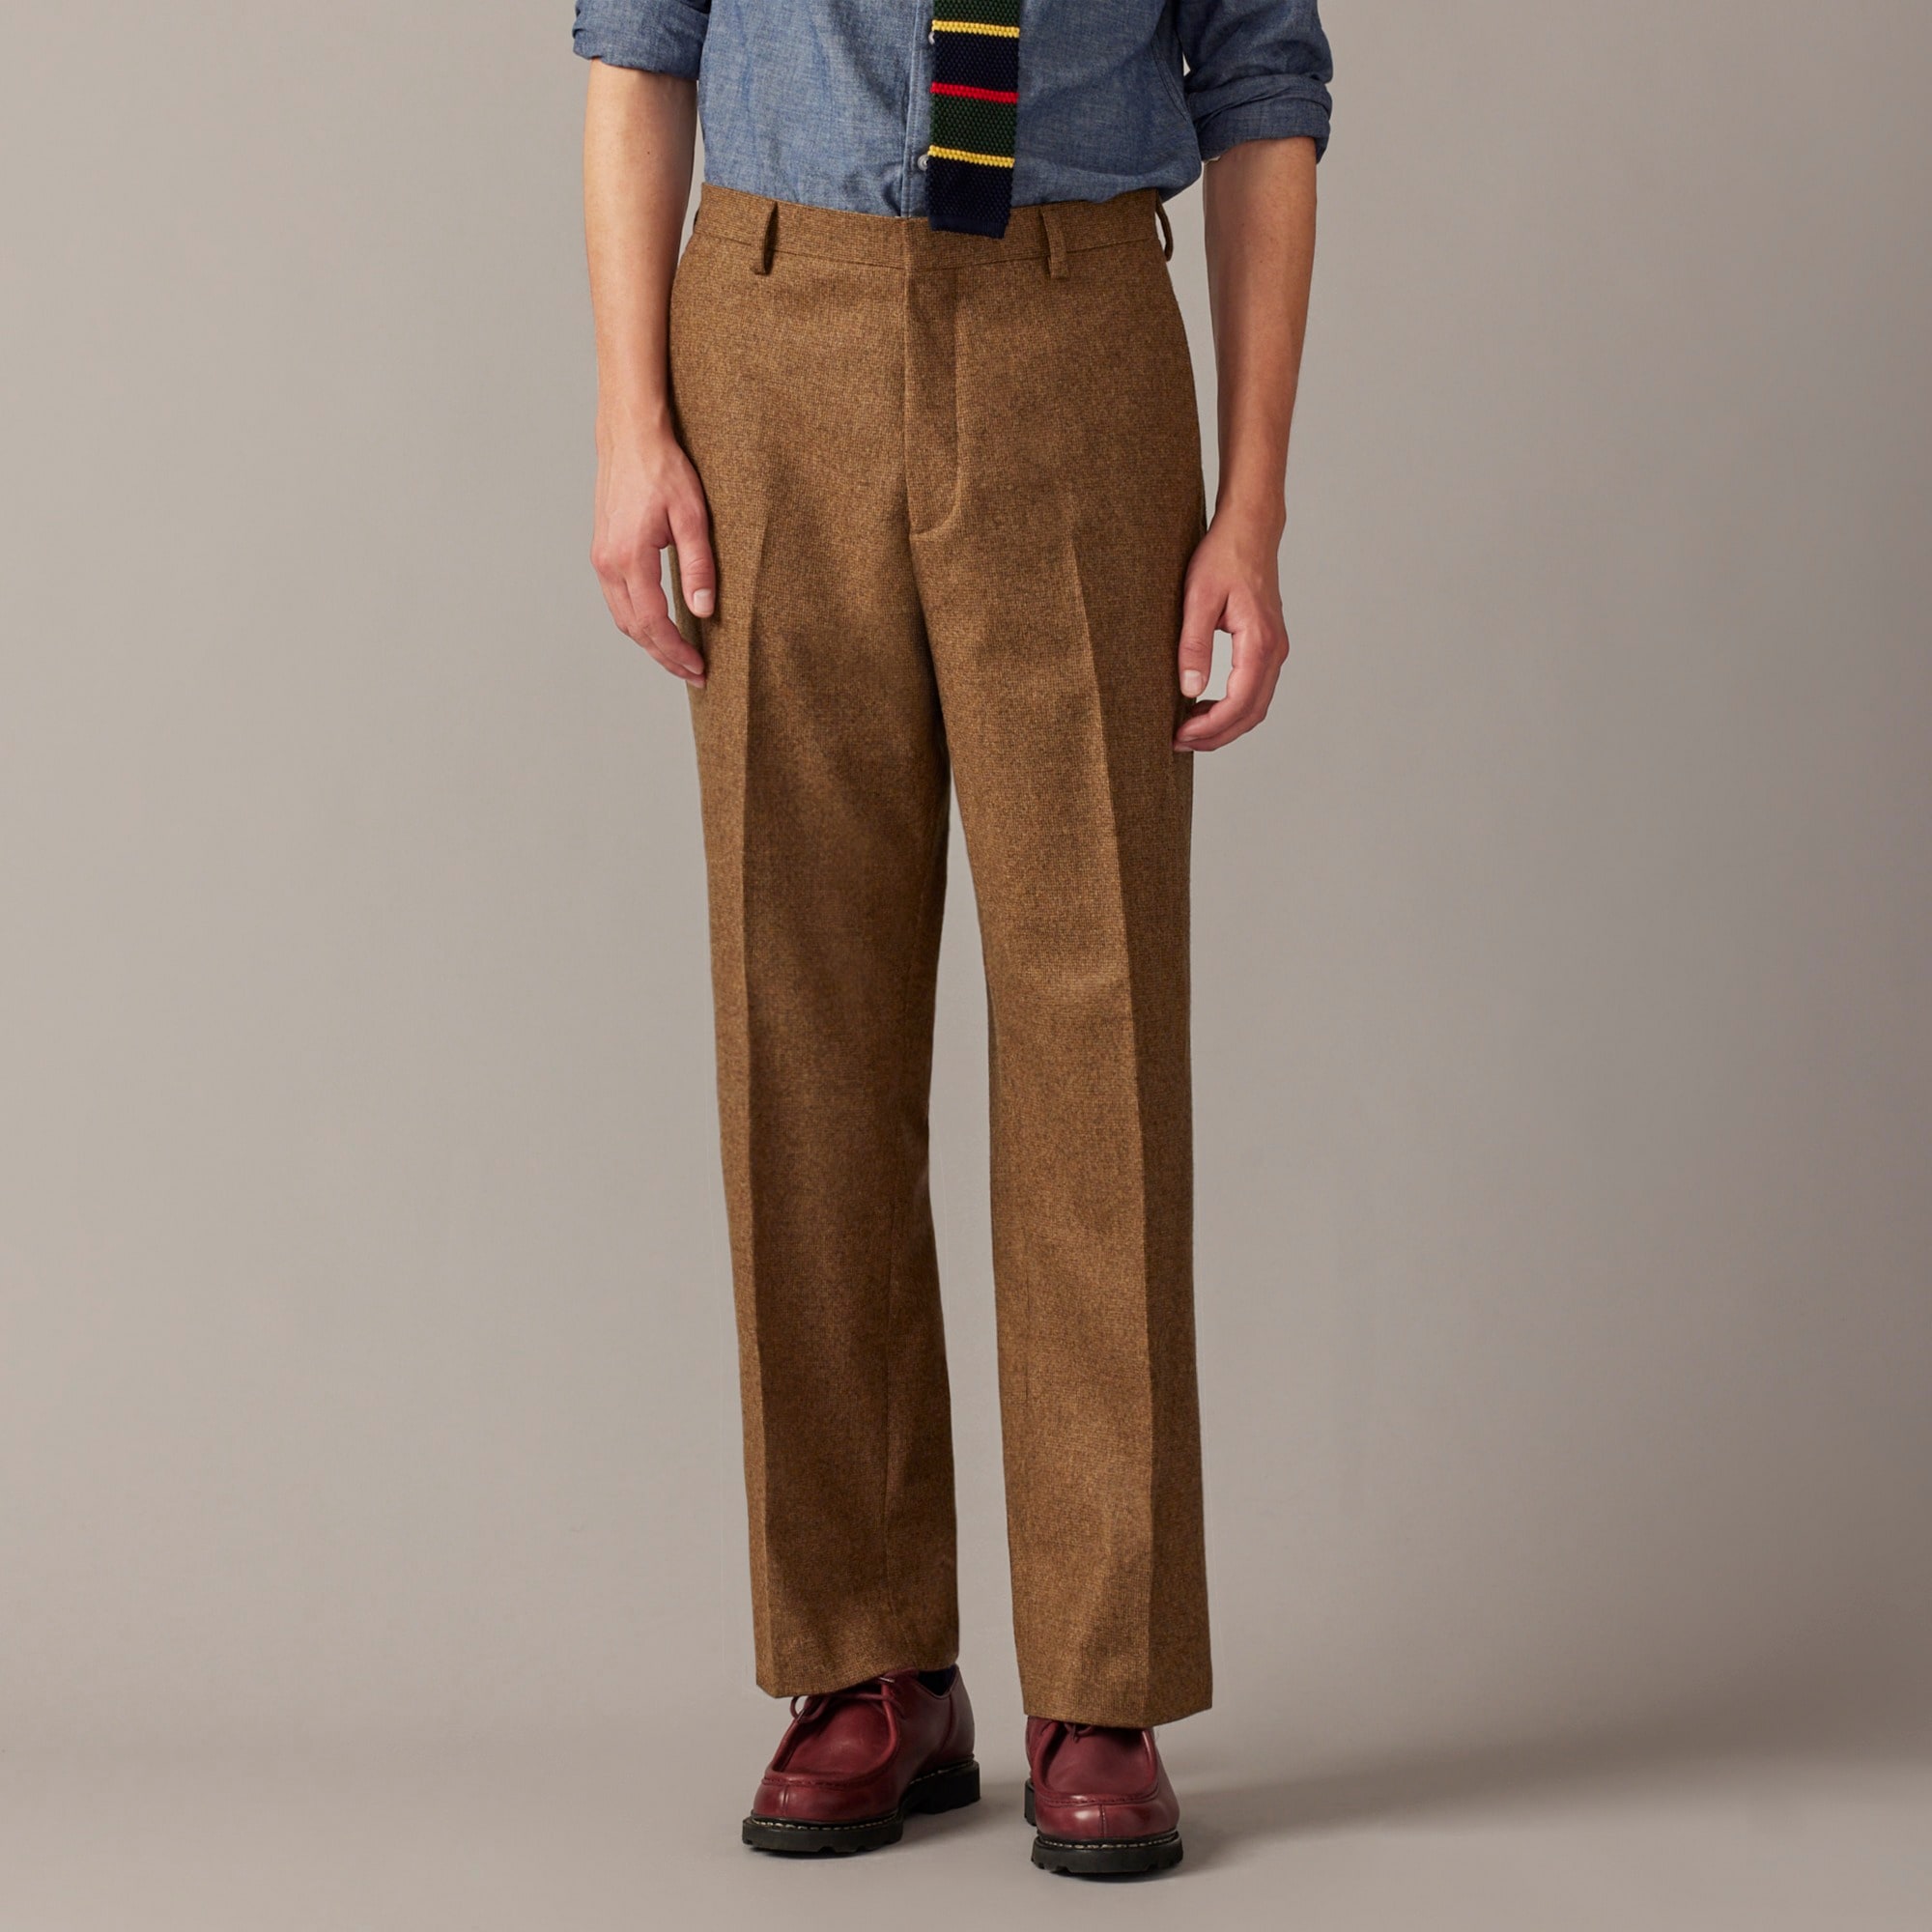  Suit pant in Scottish lambswool flannel